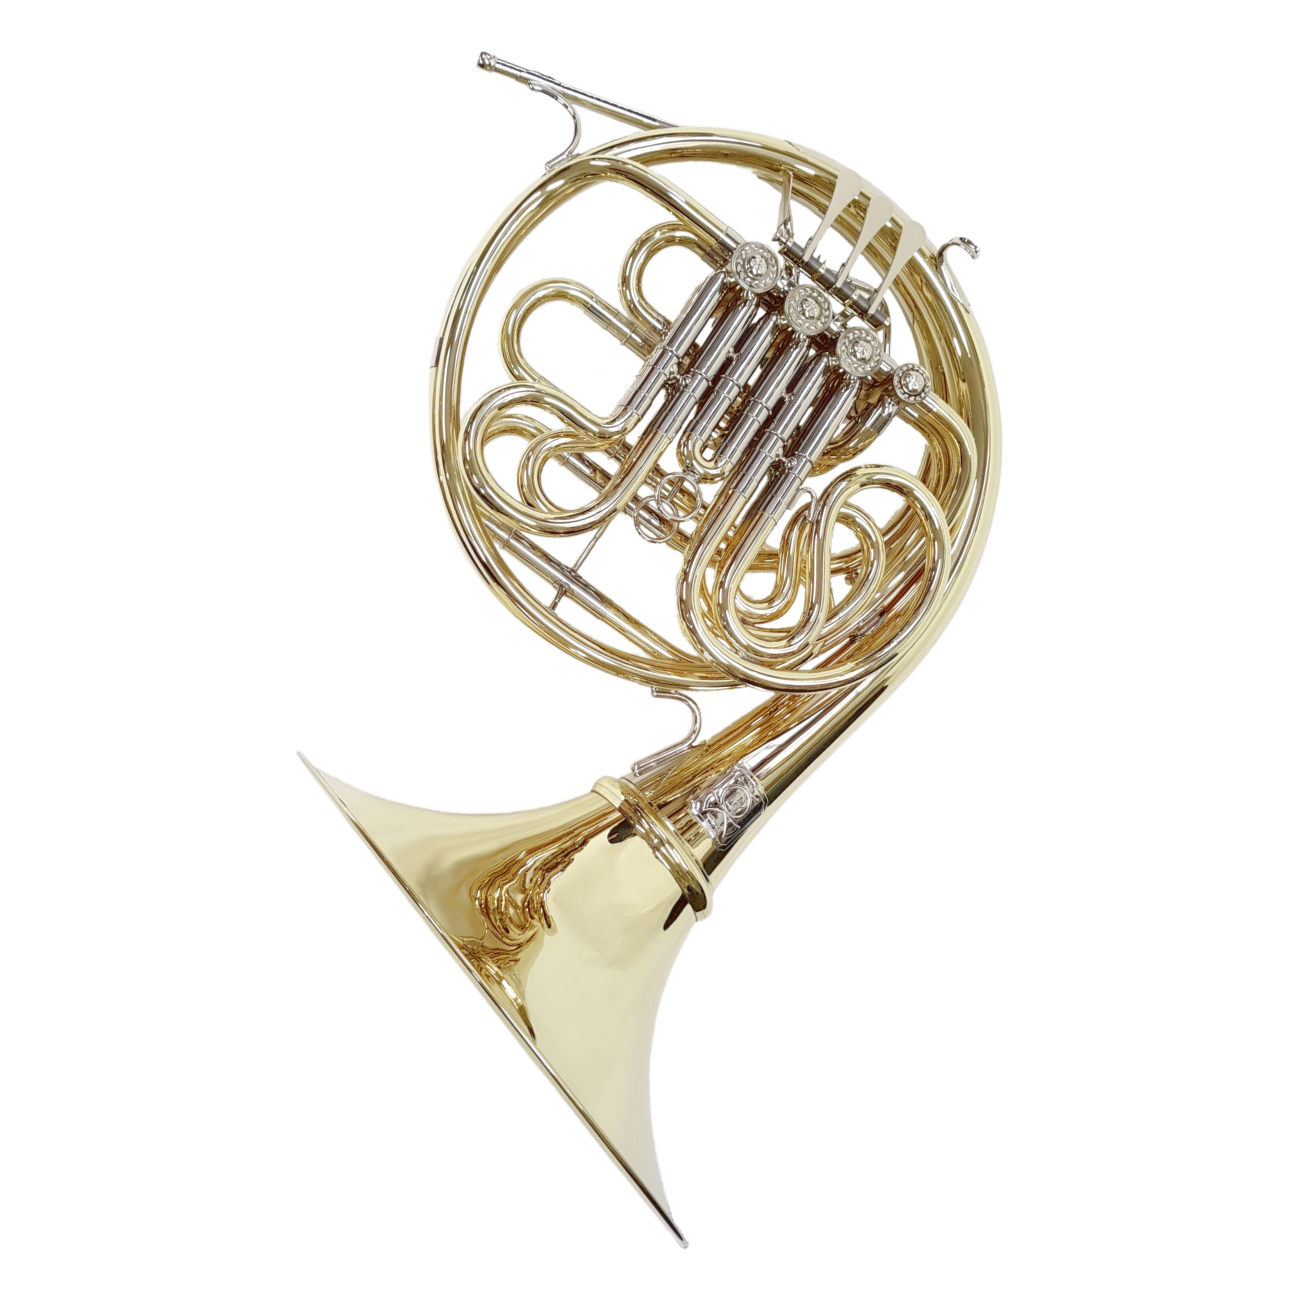 Paxman - Professional Model 27 Bb/F Full Double French Horn-French Horn-Paxman-Music Elements